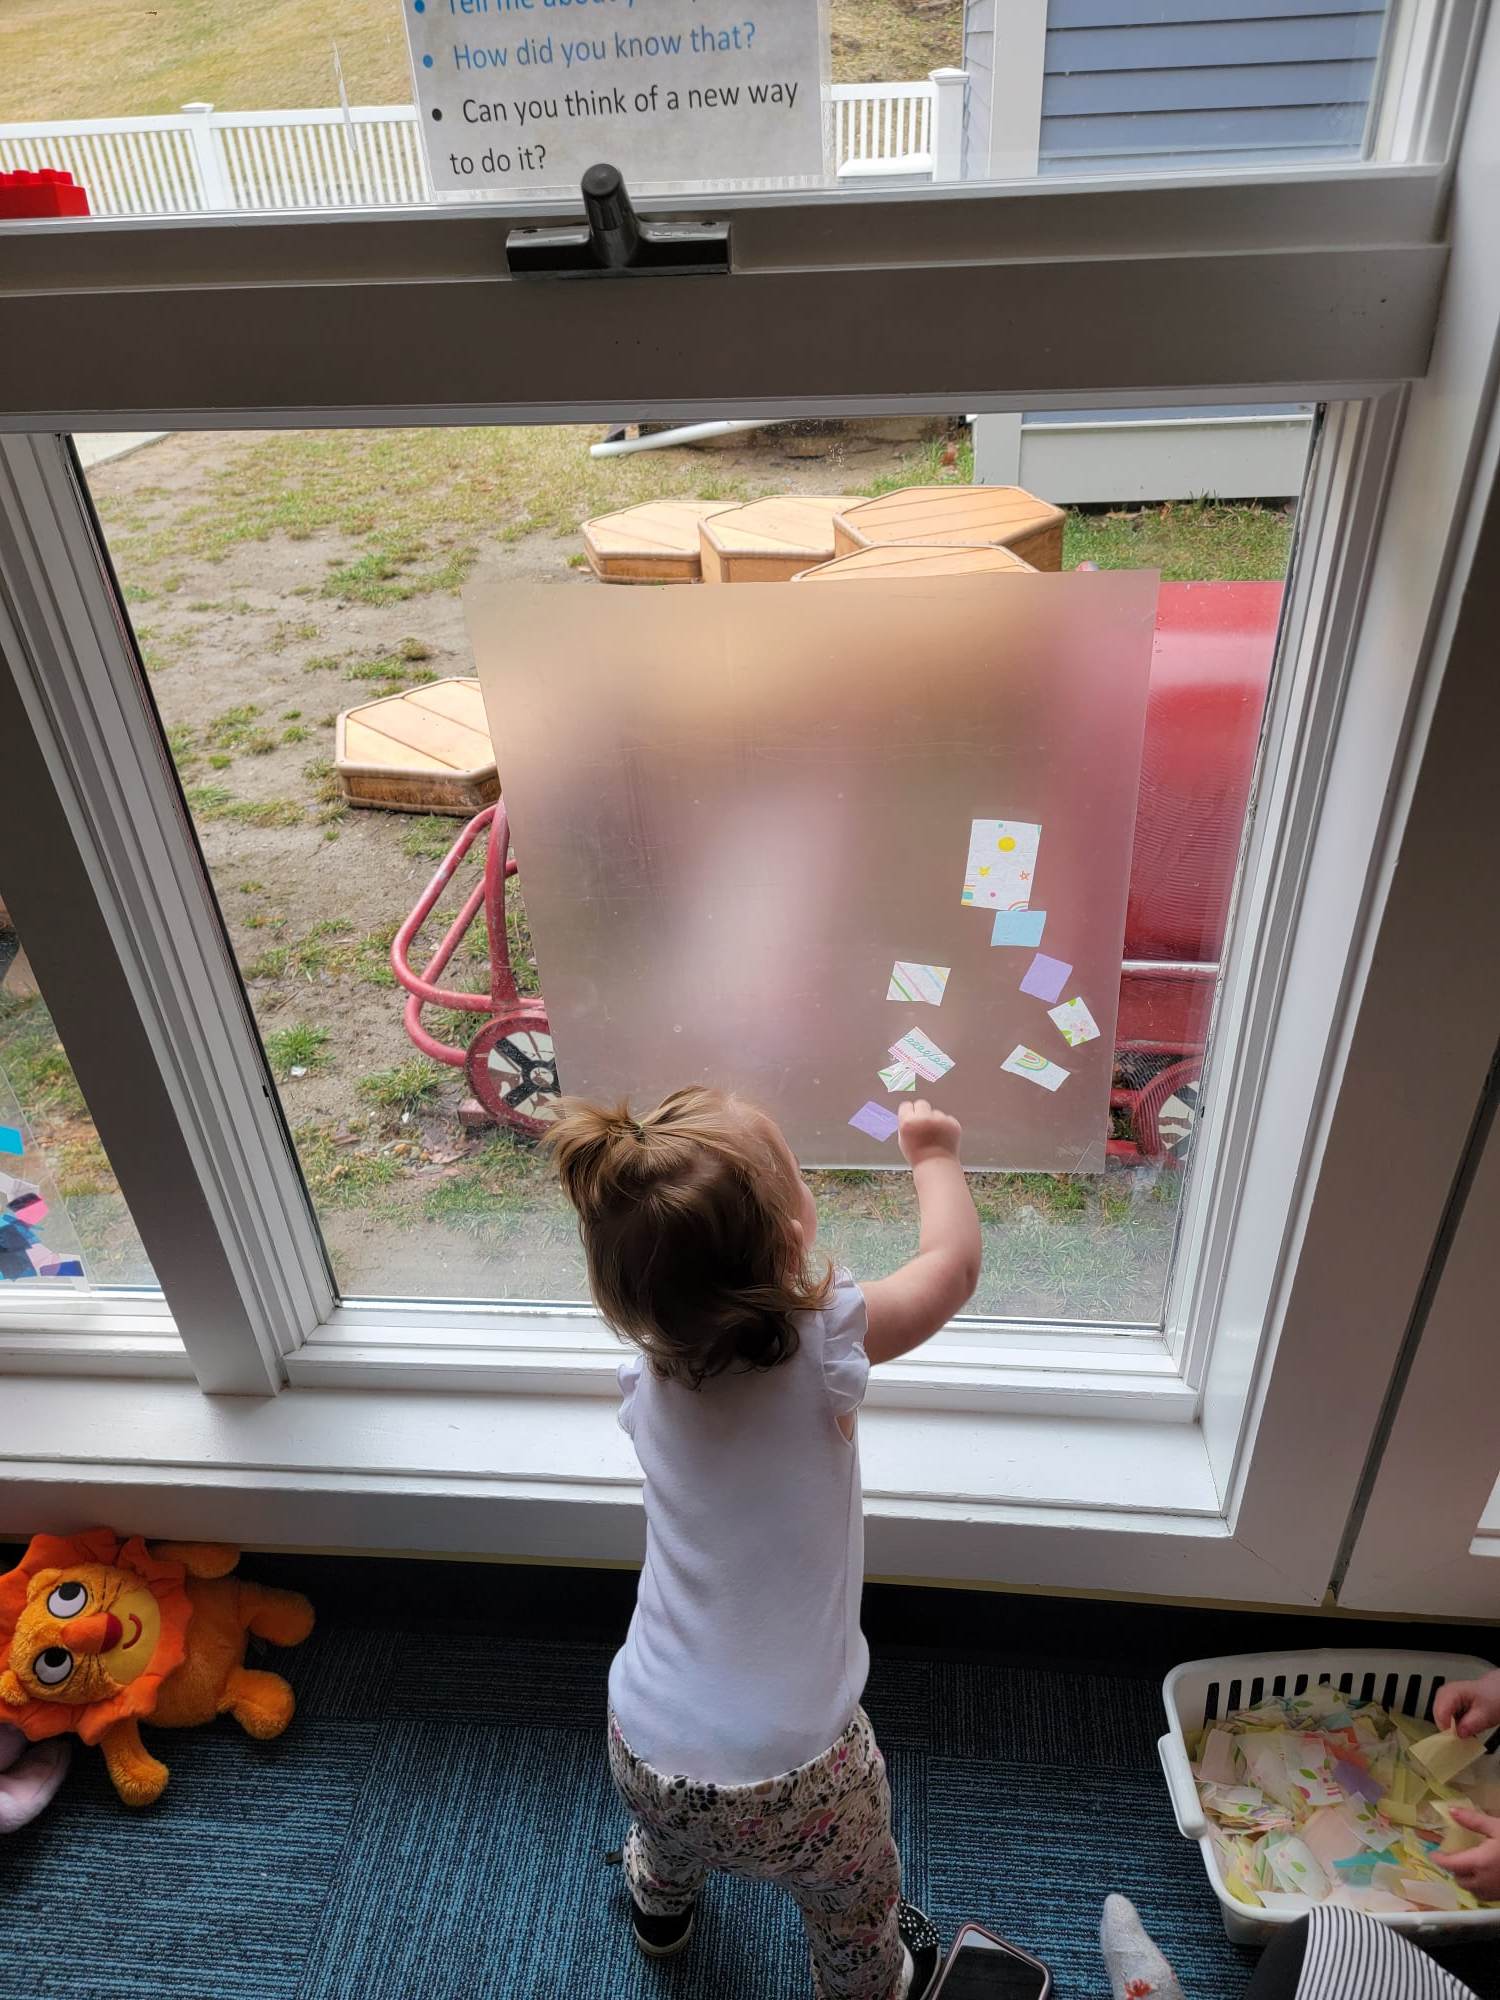 A young child with a ponytail puts art on a window.